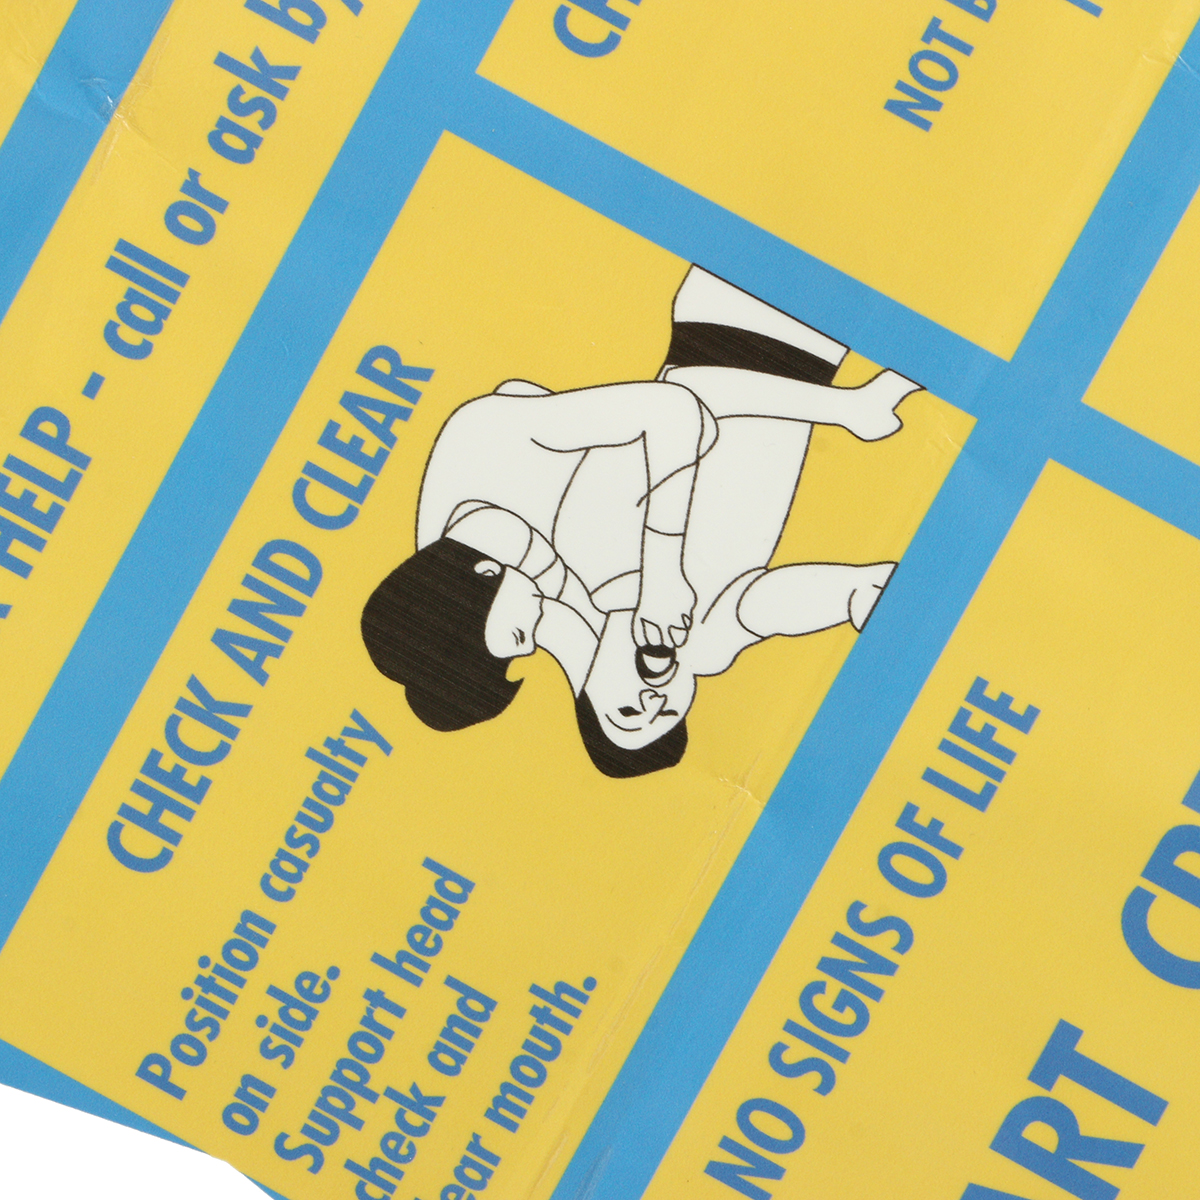 600x400mm-Plastic-CPR--Resuscitation-Chart-DRSABC-Pool-Spa-Safety-Sign-Wall-Sticker-1405988-7